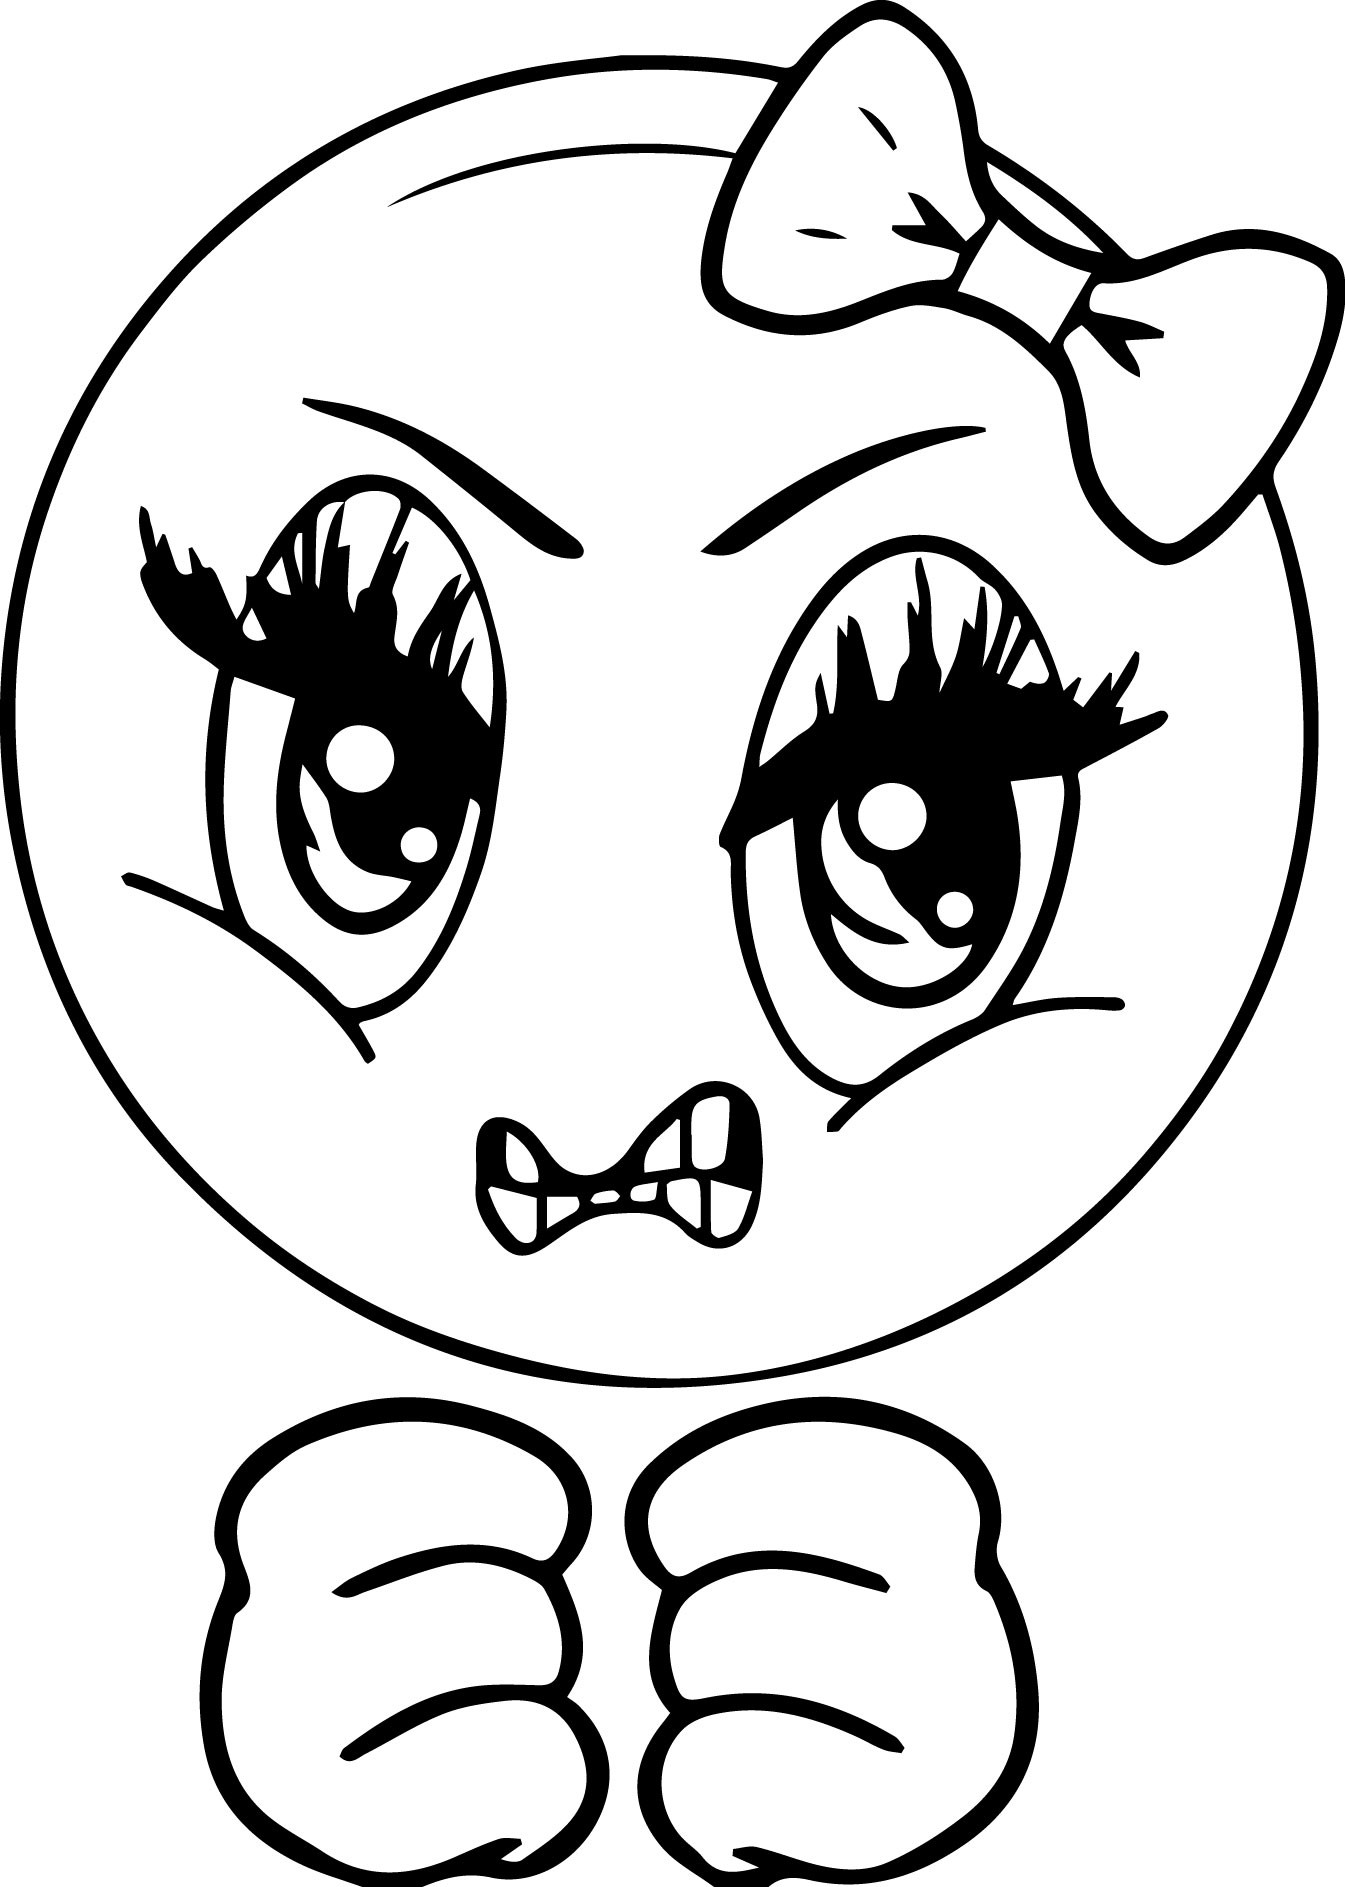 Girl Emoji Coloring Pages
 Angry Girl Smiley Emoticon Face Coloring Page